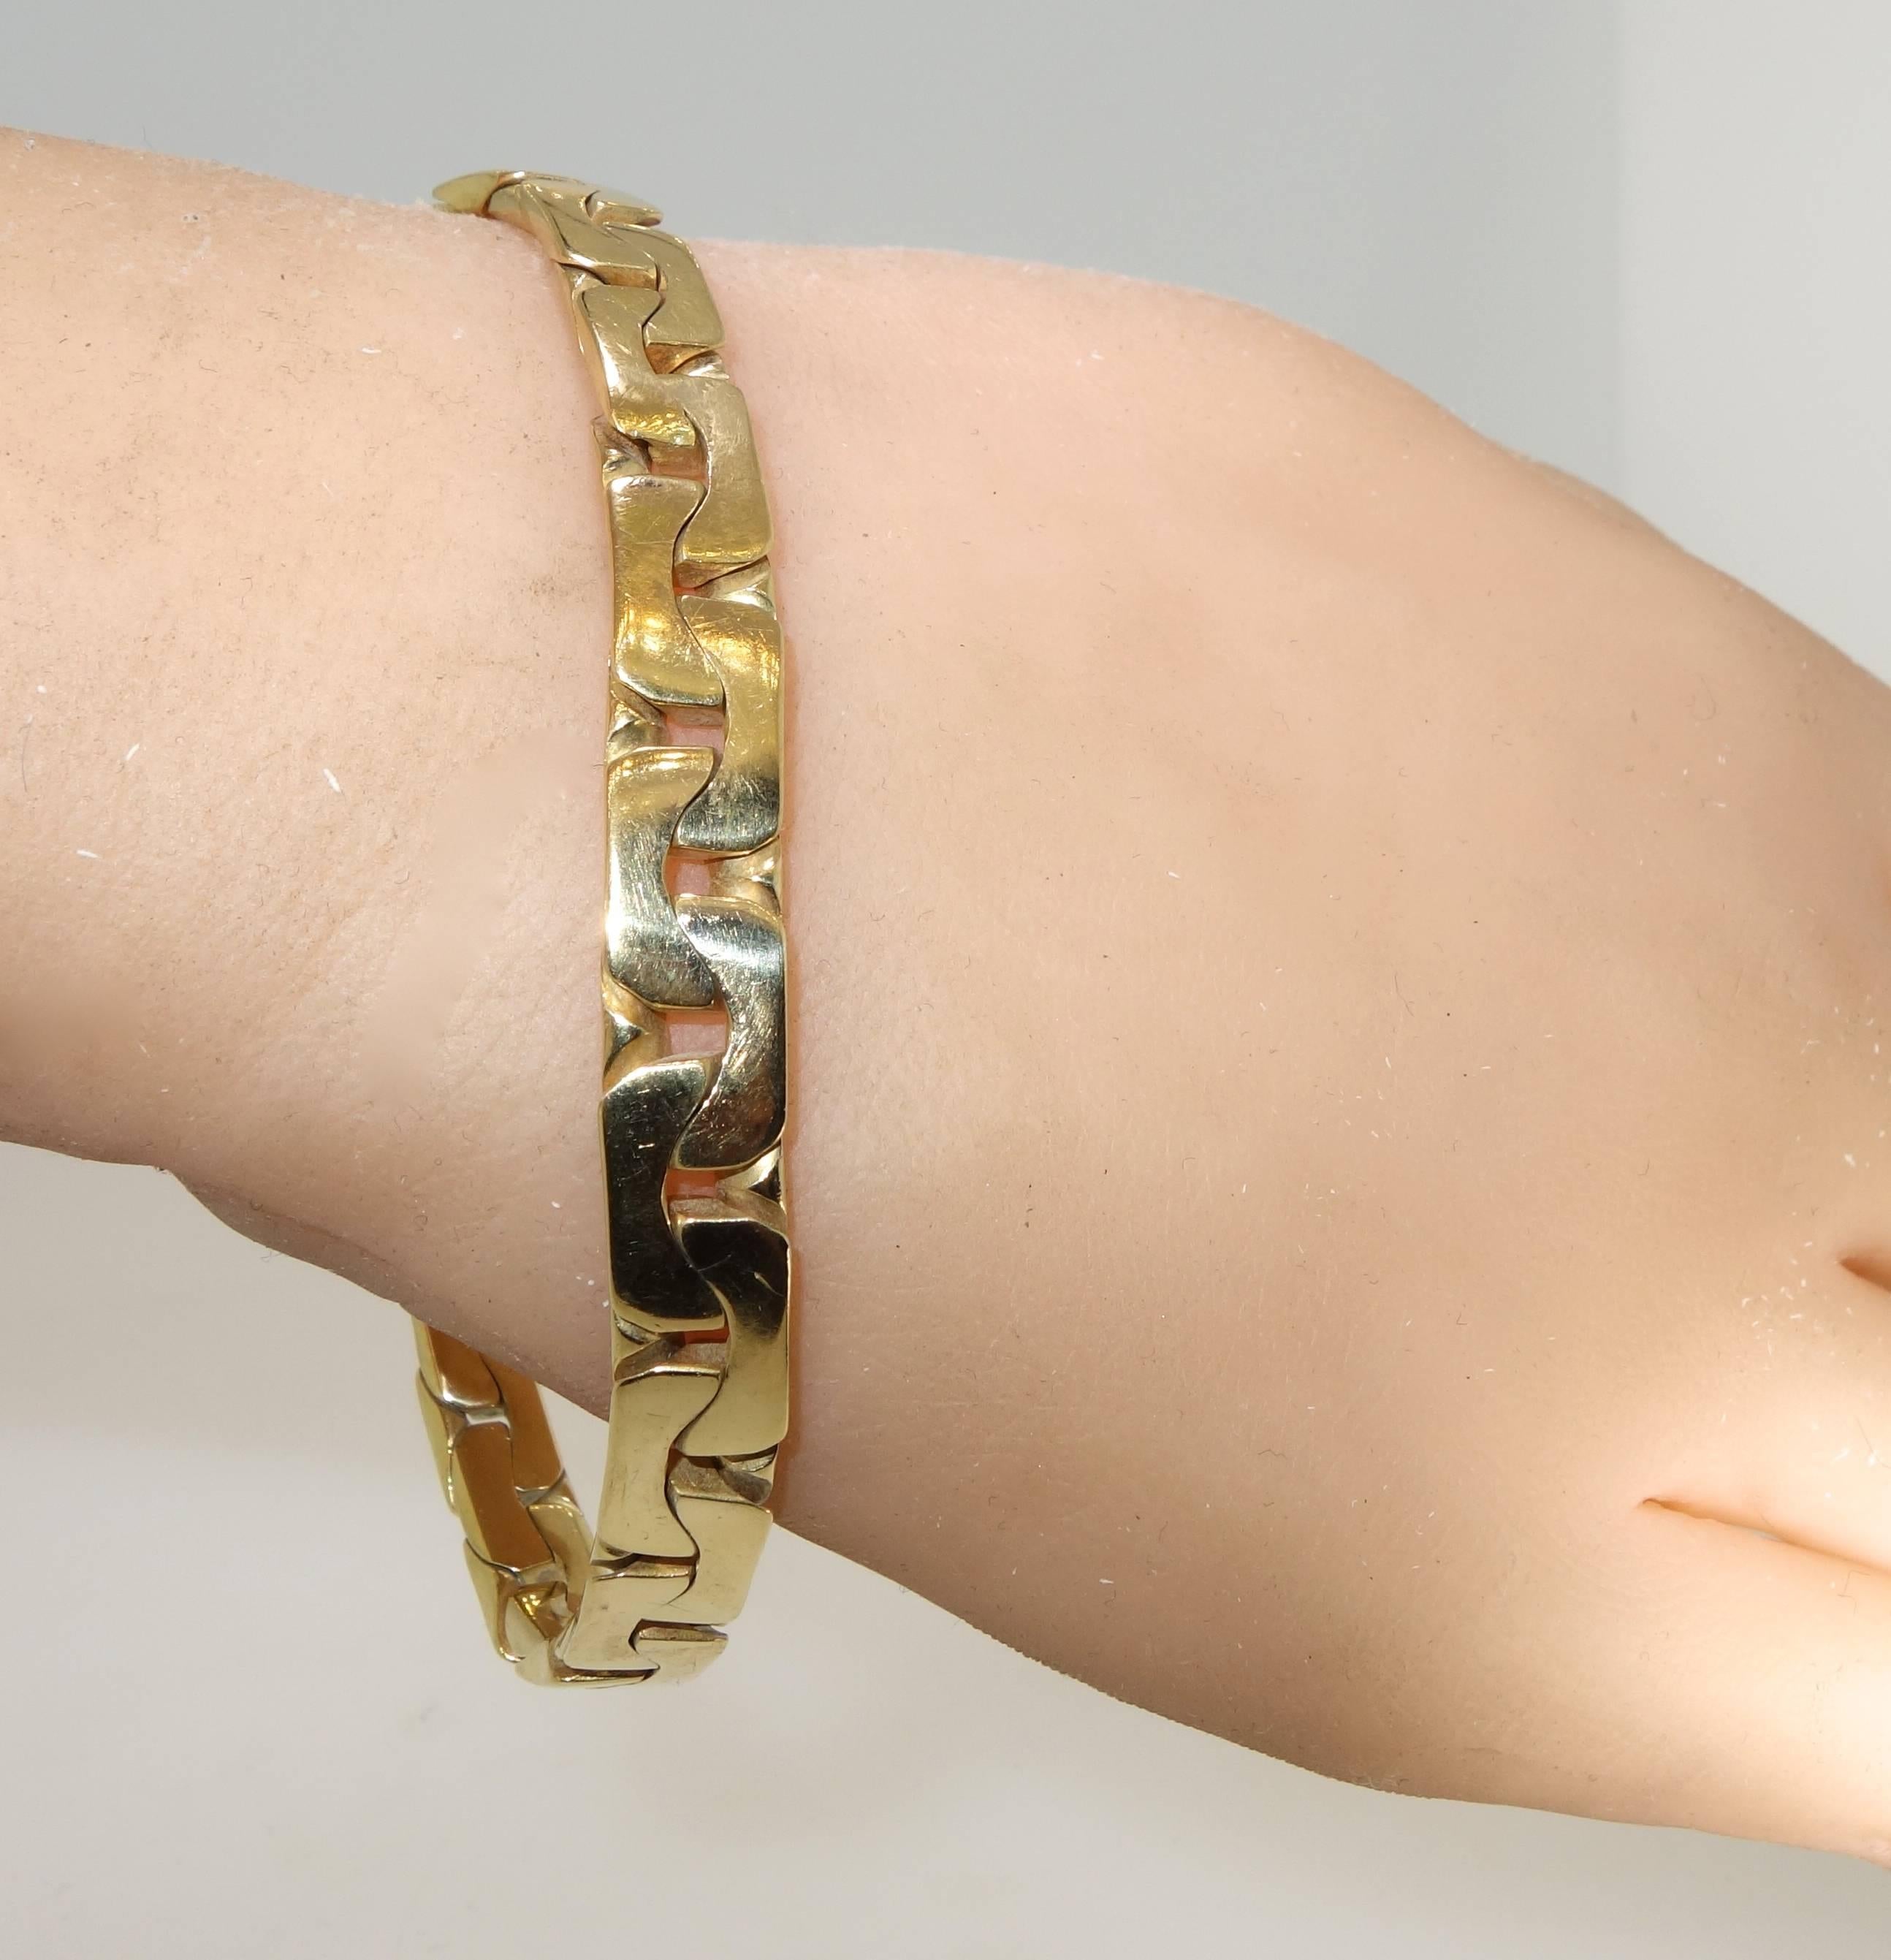 18K gold weighing 43.14 grams, the unusual locking links creates an interesting statement for the wrist.  This bracelet is 7.5 inches long with a nice locking clasp.